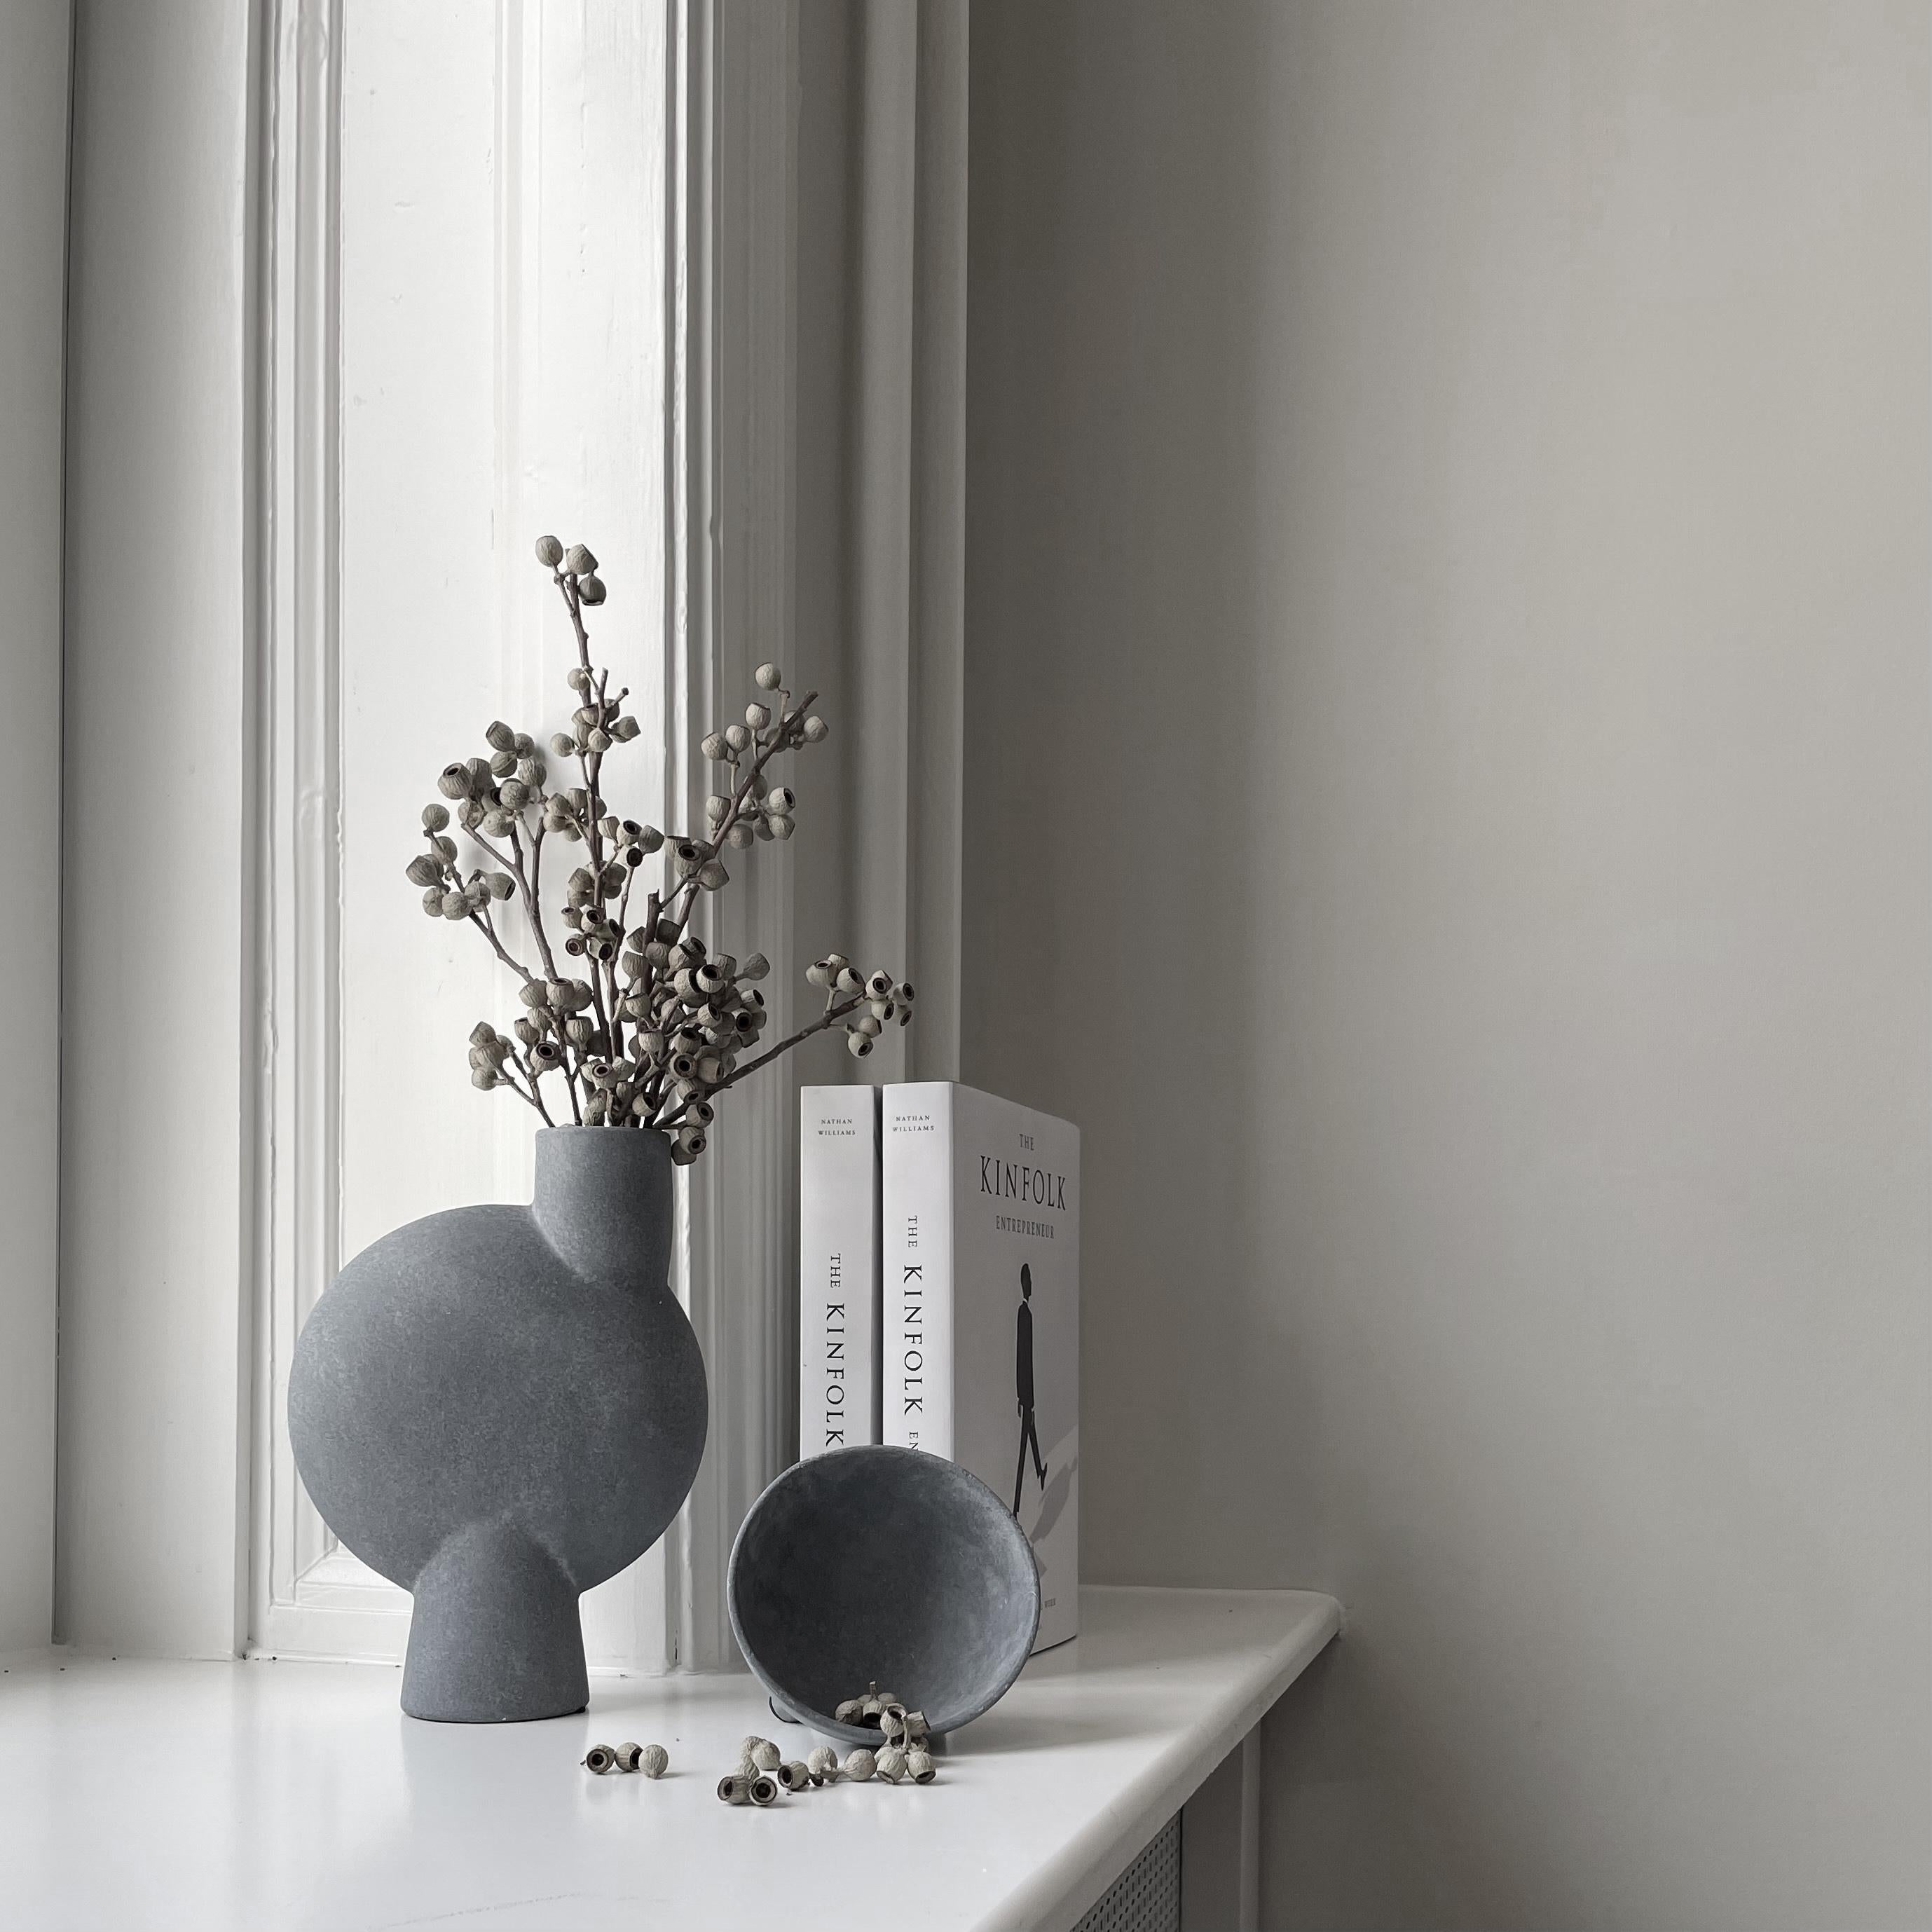 A set of 4 light grey Medio sphere vase Bubl by 101 Copenhagen
Designed by Kristian Sofus Hansen & Tommy Hyldahl
Dimensions: L18 / W8 / H26 CM
Materials: Ceramic

The Sphere collection celebrates unique silhouettes and textures that makes an